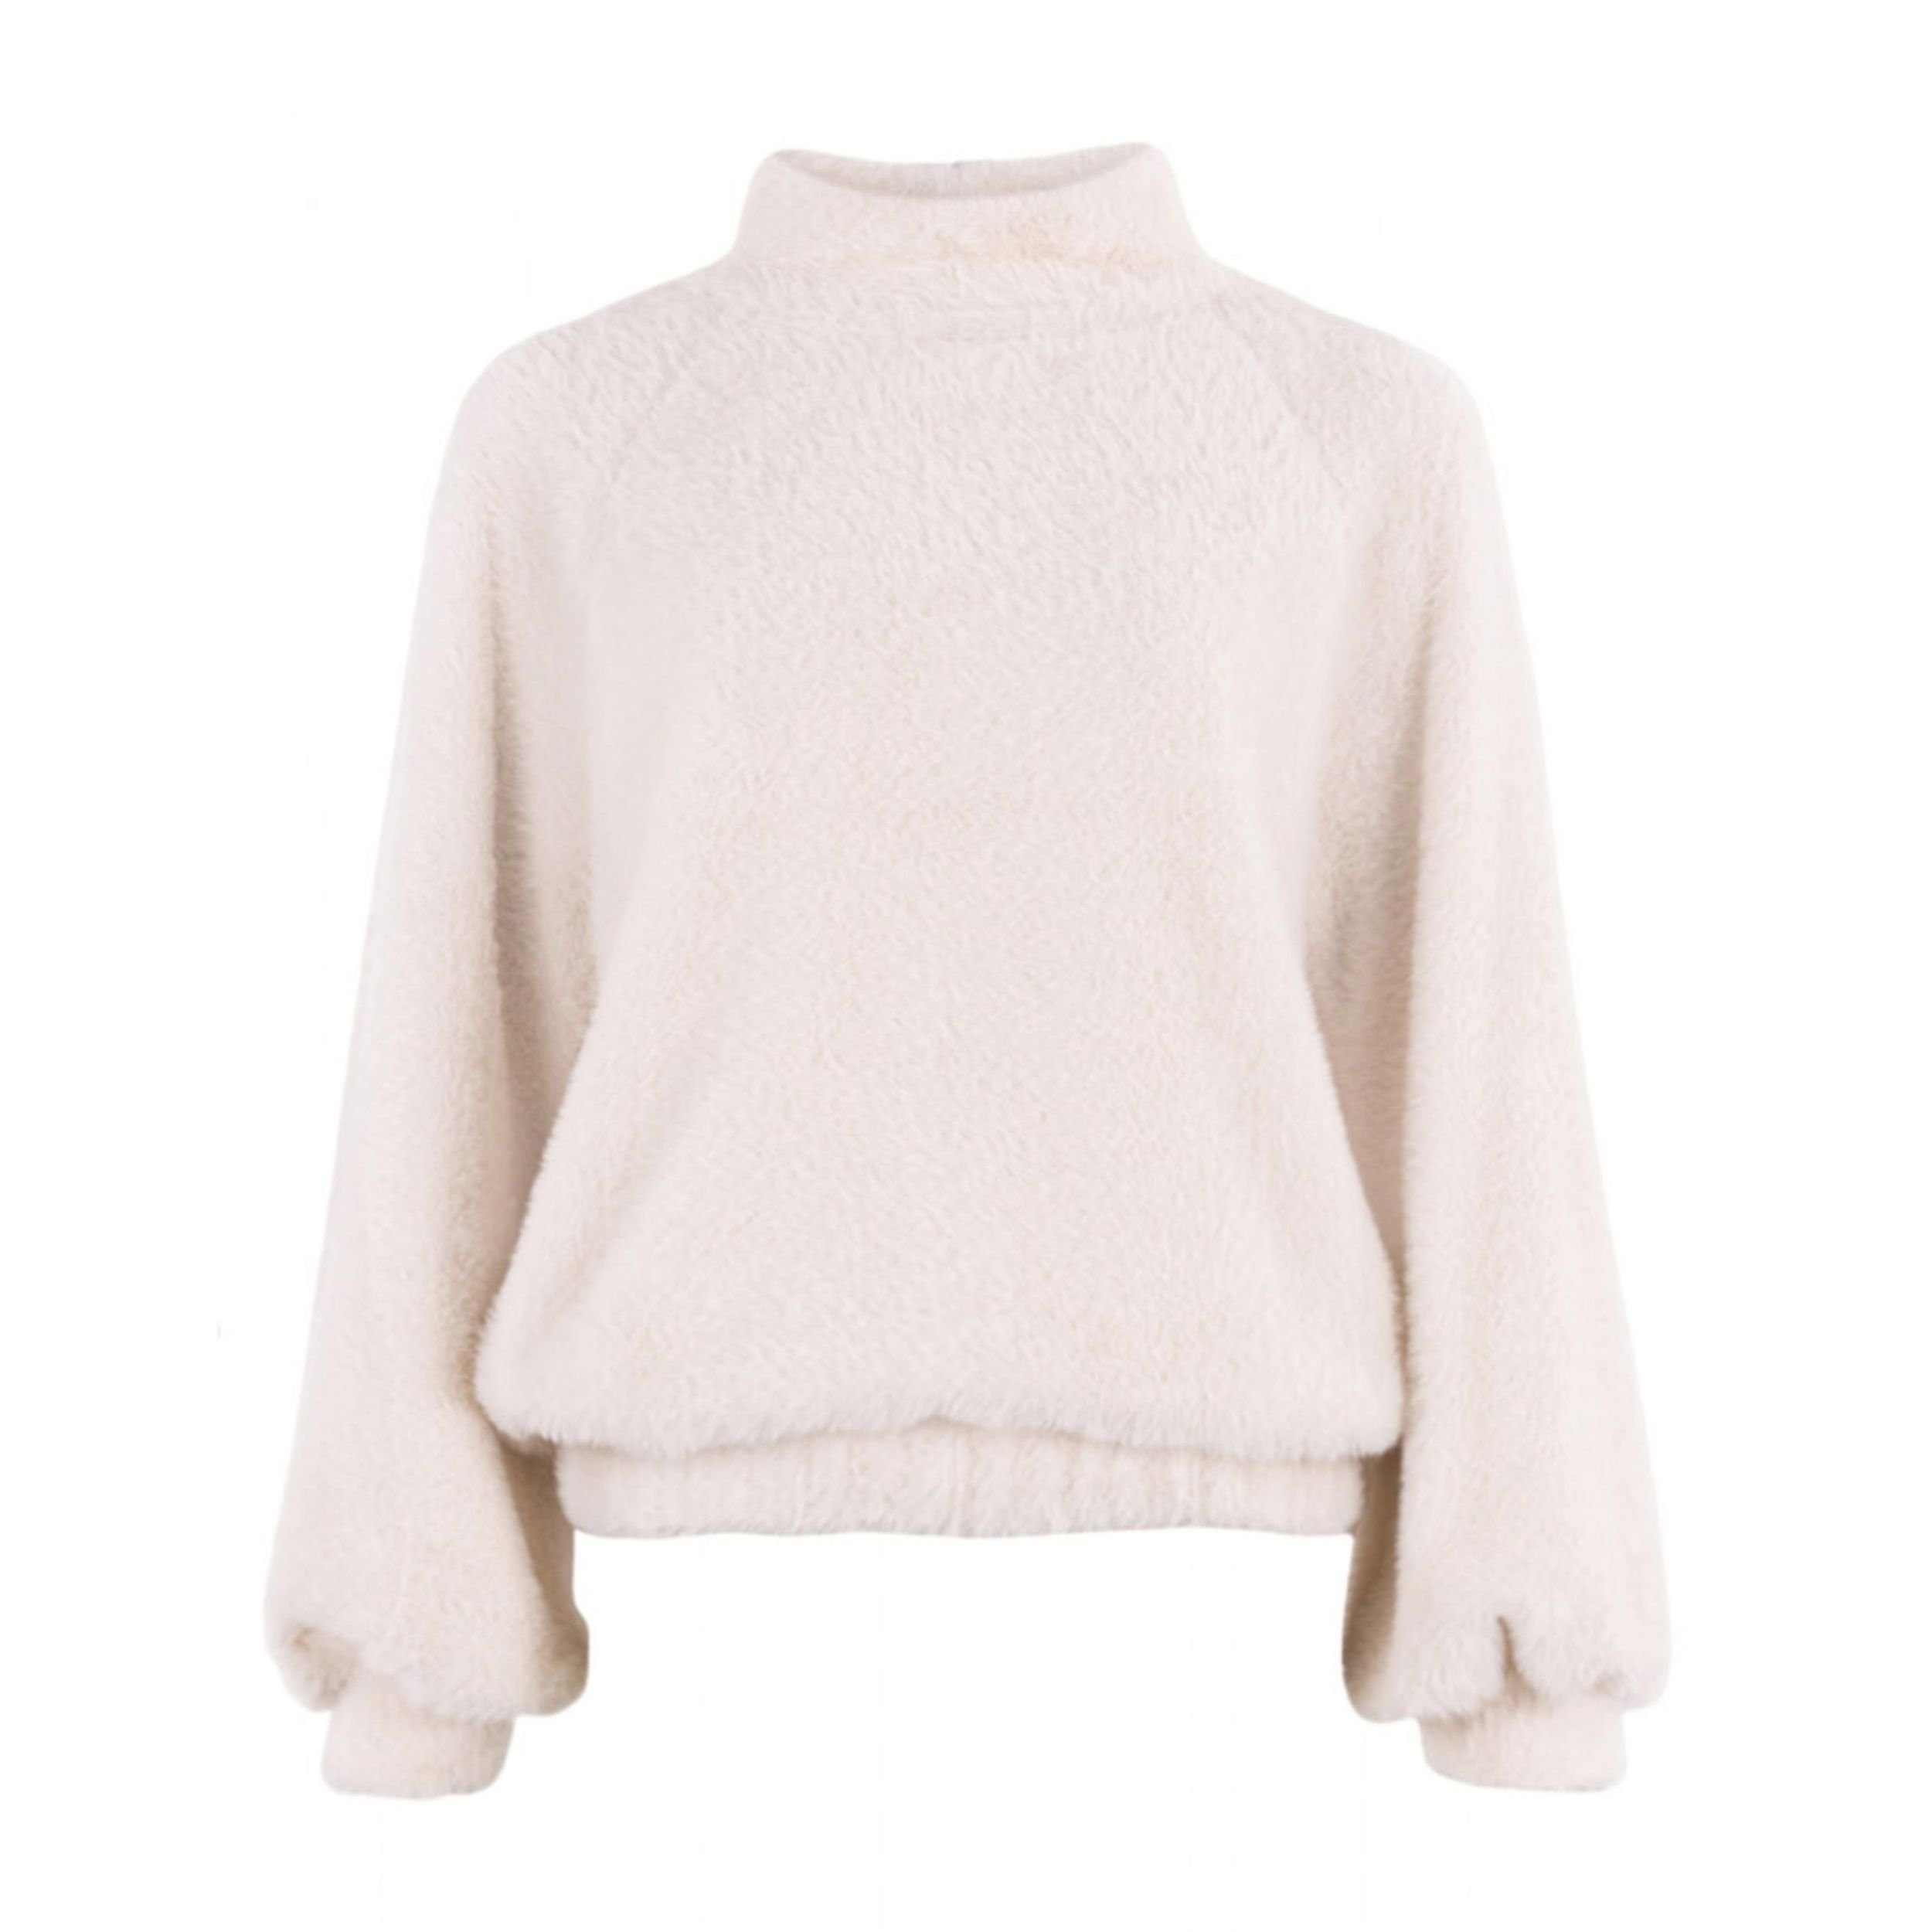 Moscow Pullover Stehkragenpullover Sand in Tristana Design Fell